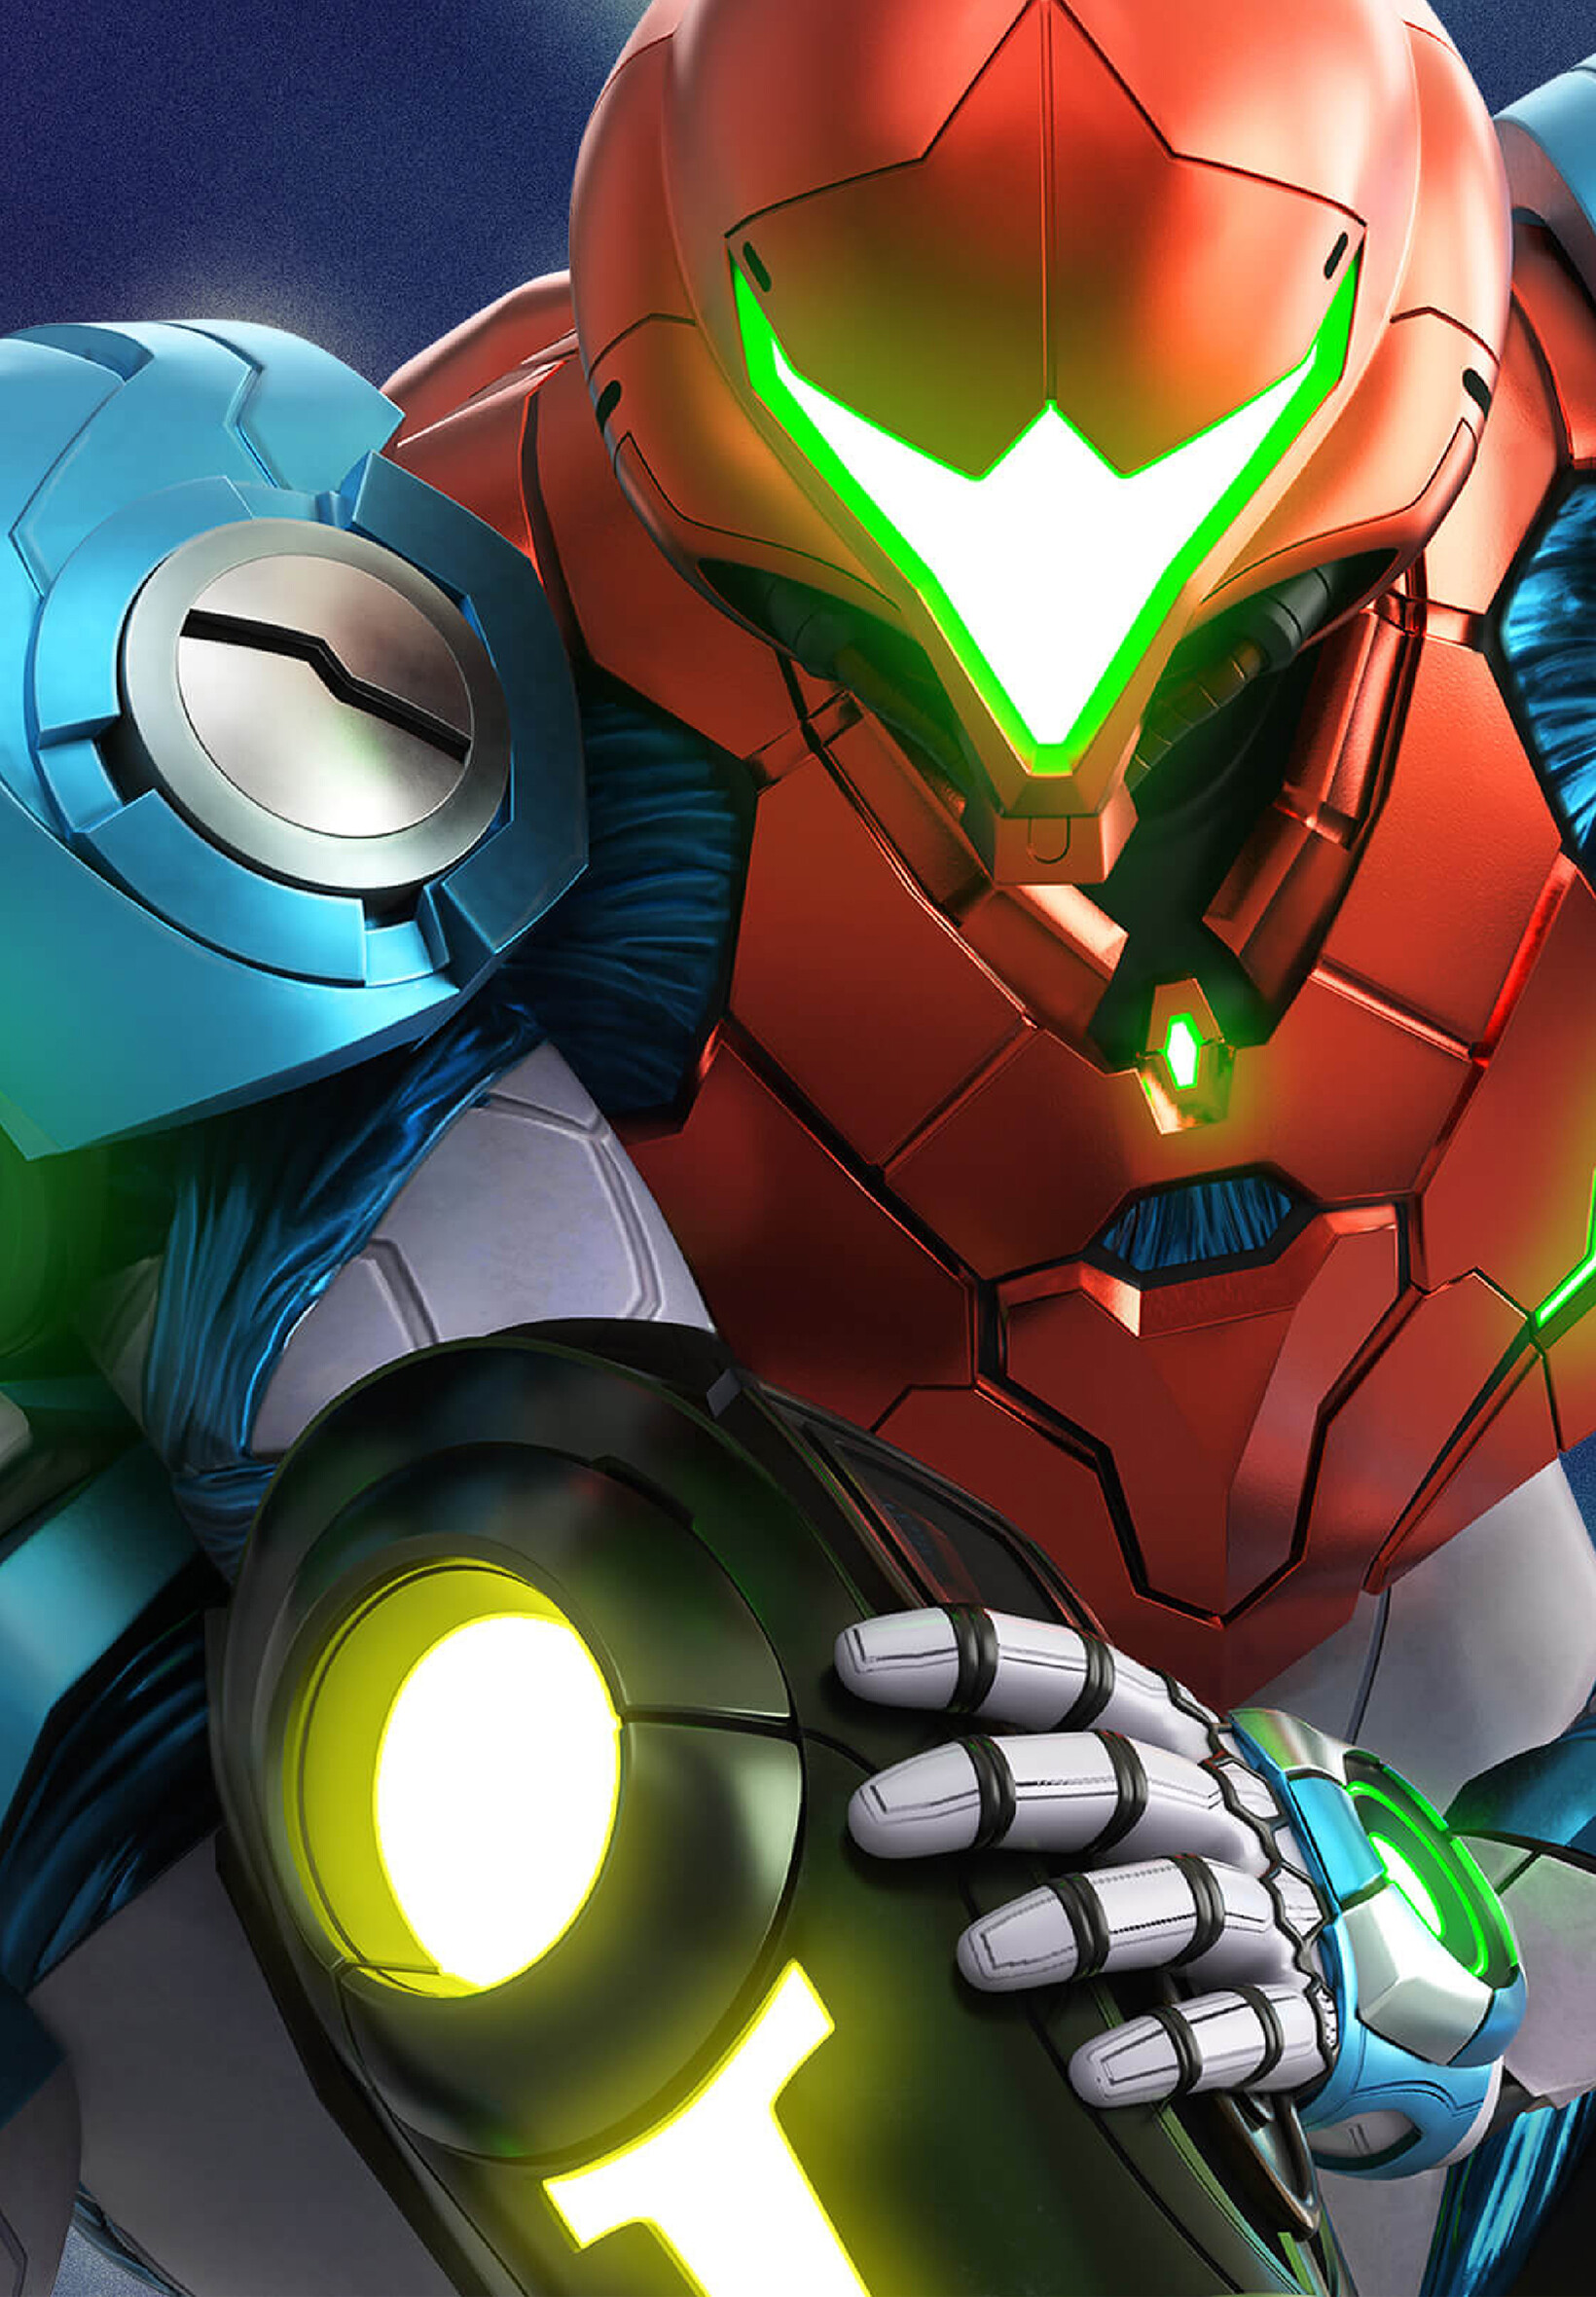 Metroid Dread: Samus Aran is an ex-soldier of the Galactic Federation who became a galactic bounty hunter, usually fitted with a powered exoskeleton that is equipped with weapons such as directed-energy weapons and missiles. 1640x2360 HD Wallpaper.